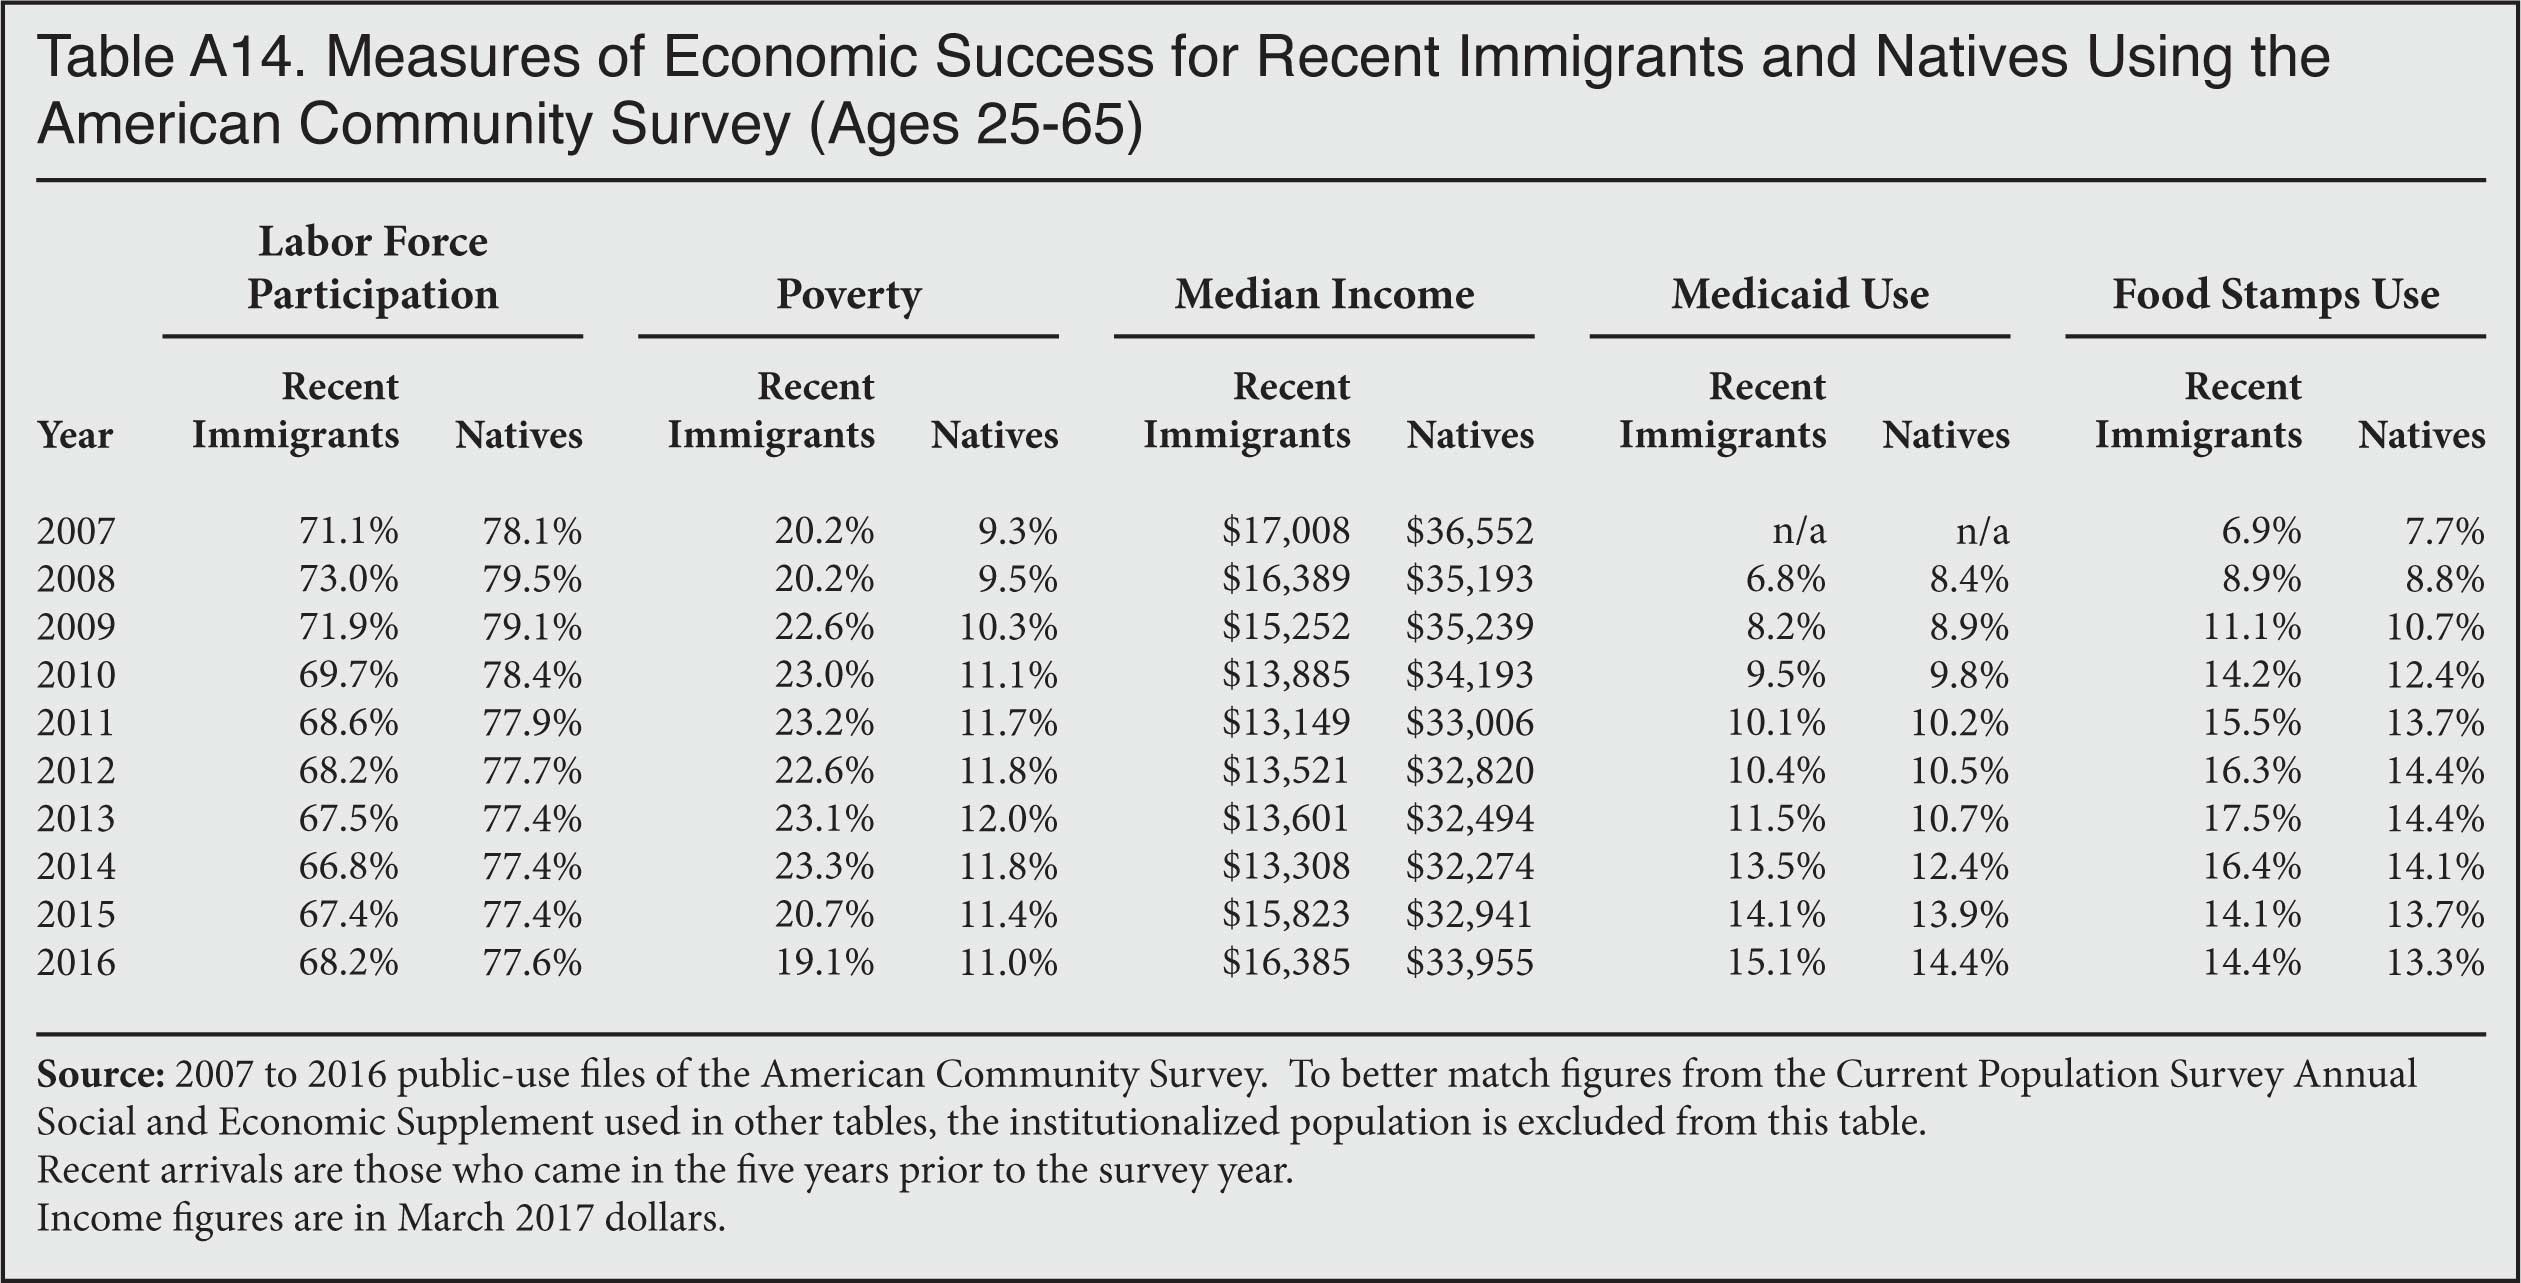 Table: Measures of Economic Success for Recent Immigrants and Natives Using the American Community Survey, 2007-2017